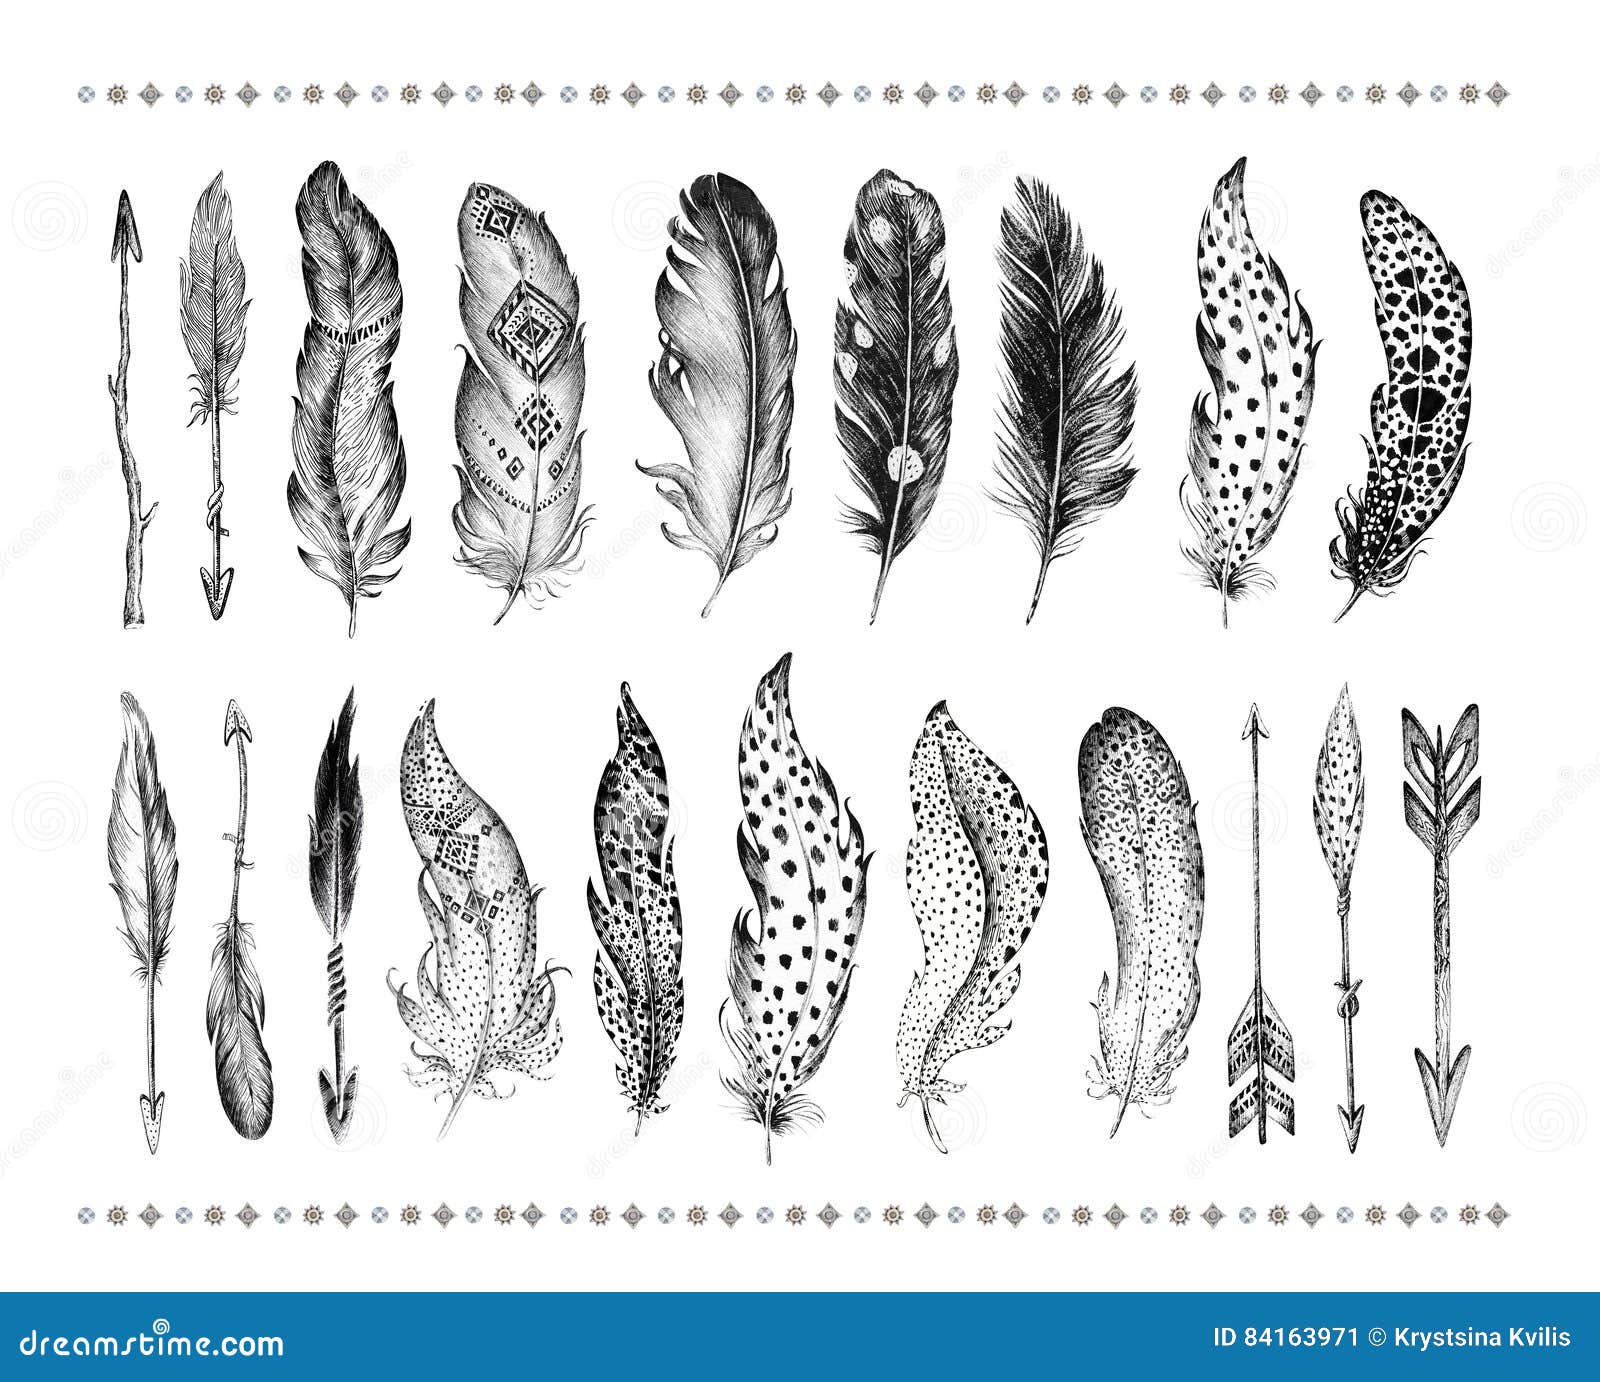 Set of bird feathers. Ease. Watercolor drawing. Natural elements.  Tropical.Isolated objects on a white background. Stock Illustration